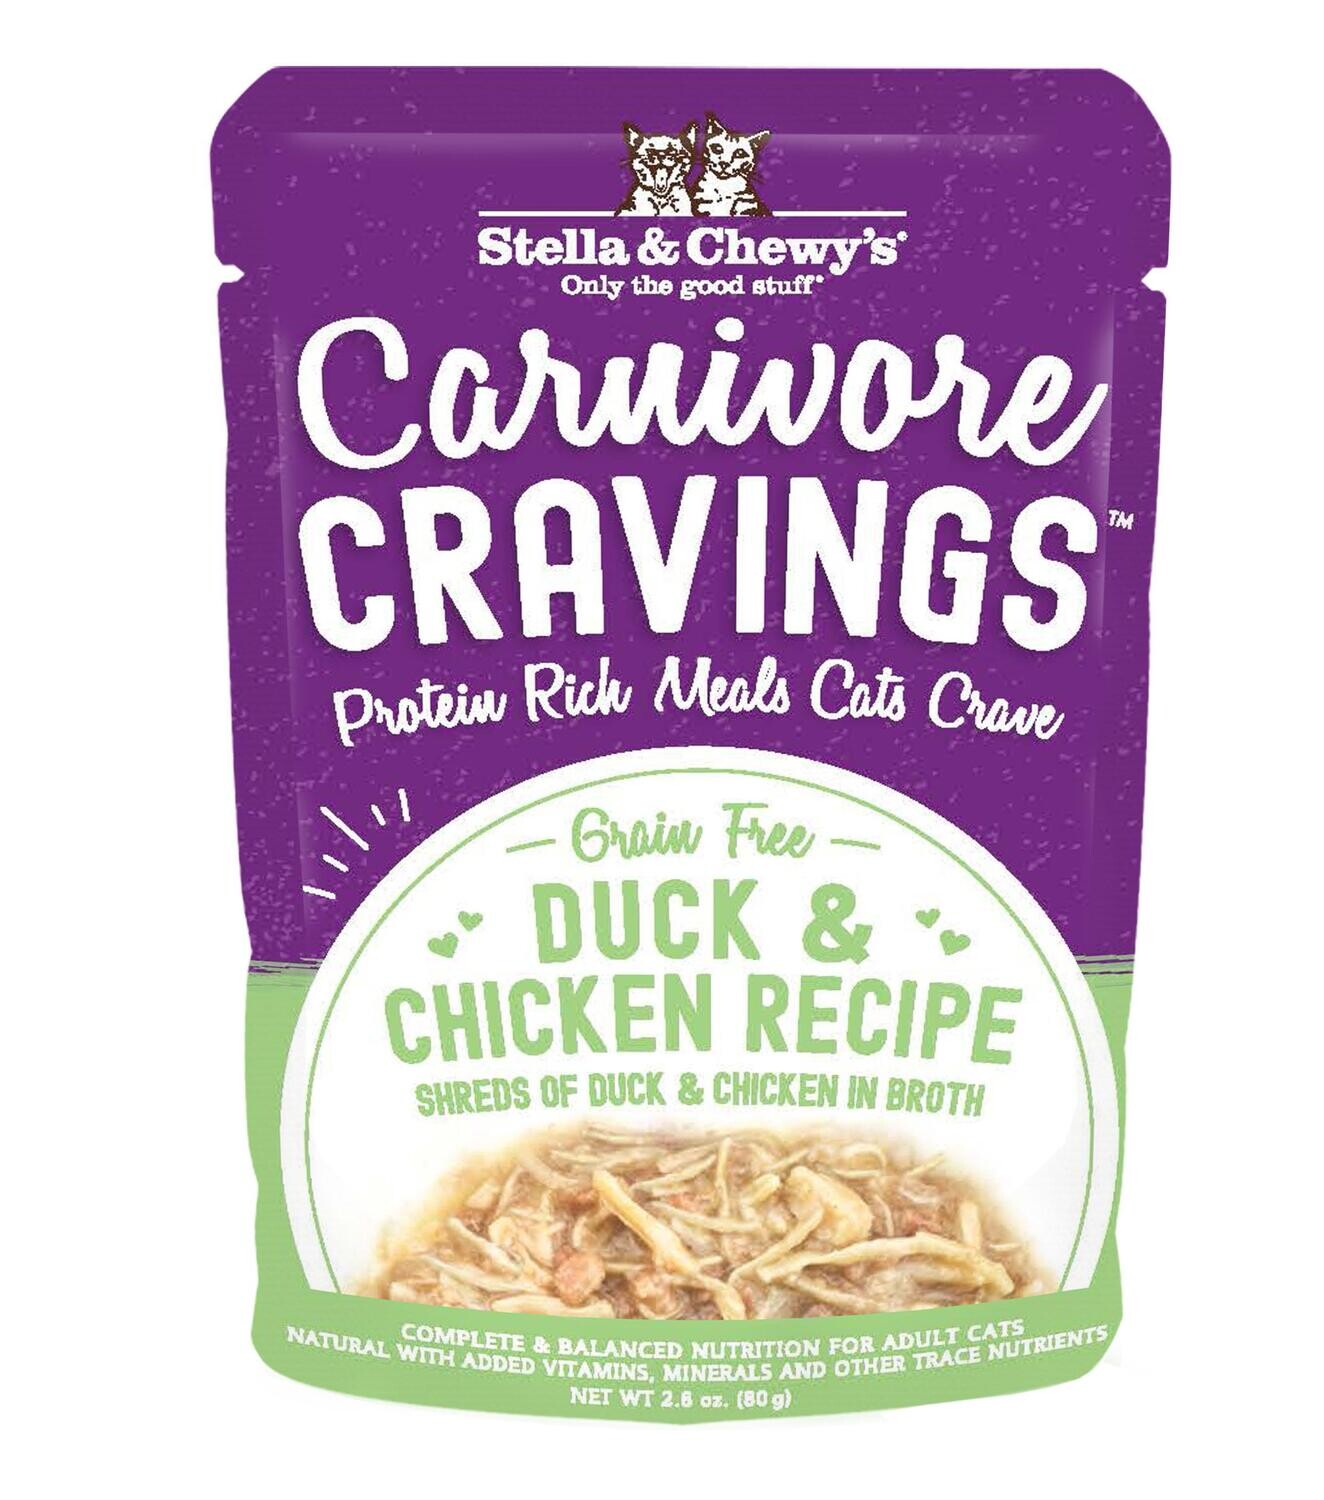 Stella & Chewy's Cat Carnivore Cravings Chicken & Duck 2.8oz pouch 24/case